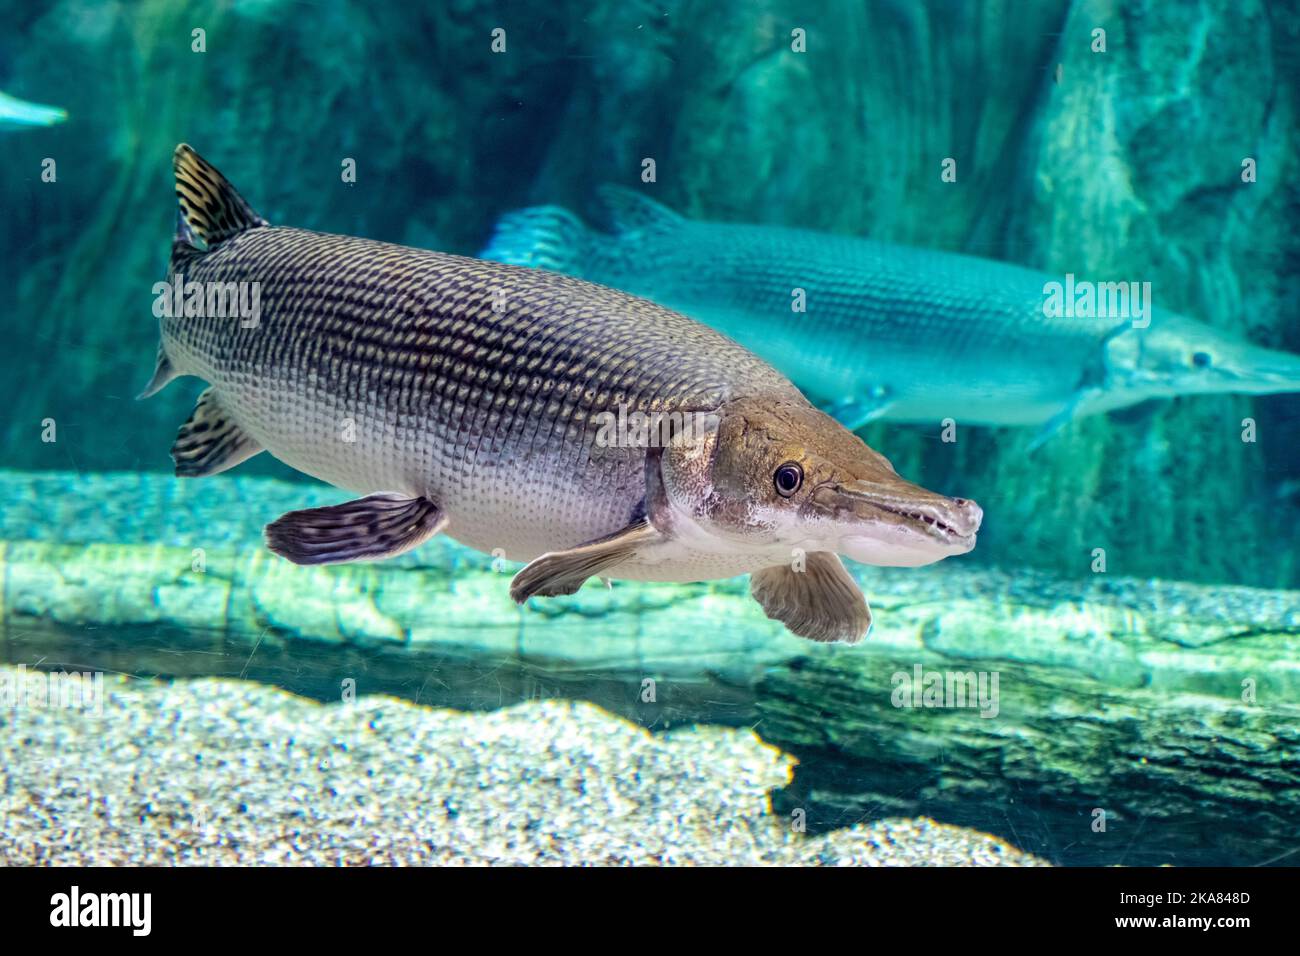 An Alligator gar(Atractosteus spatula) in water. Alligator gar is a ray-finned euryhaline fish related to the bowfin in the infraclass Holostei Stock Photo